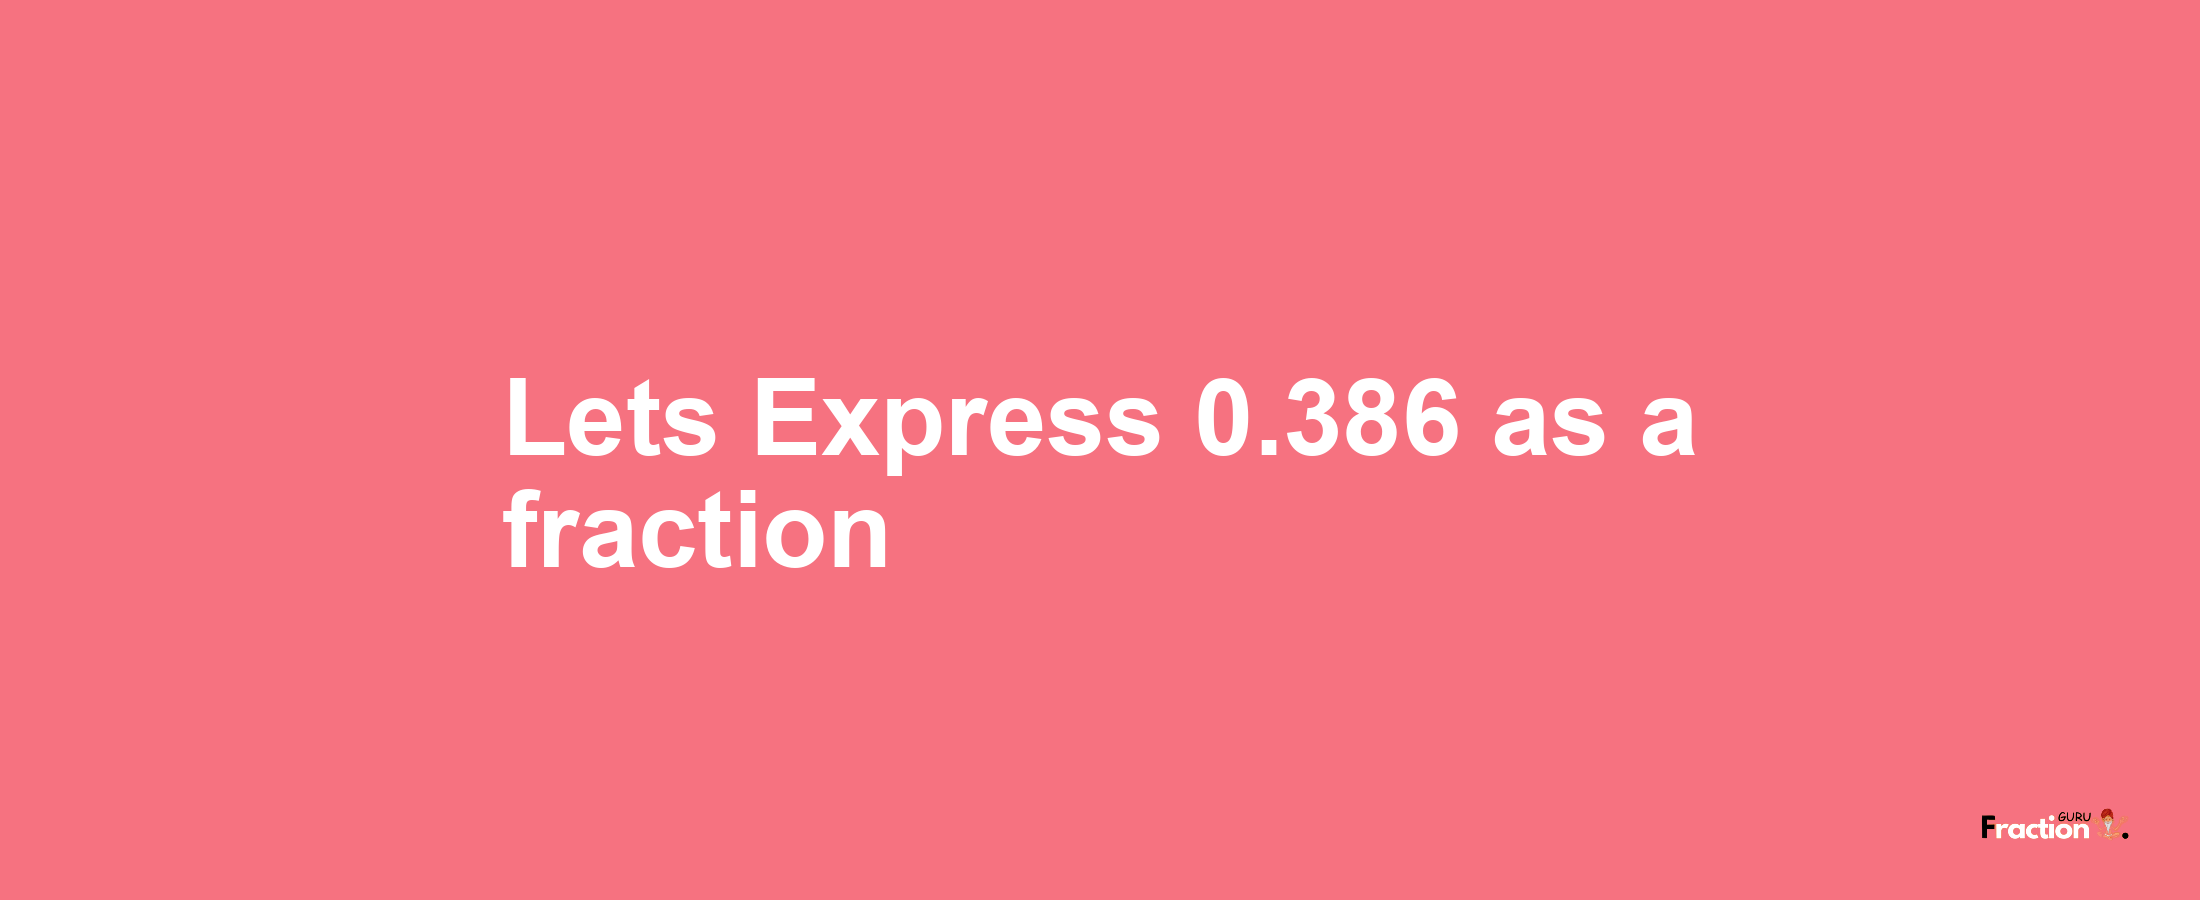 Lets Express 0.386 as afraction